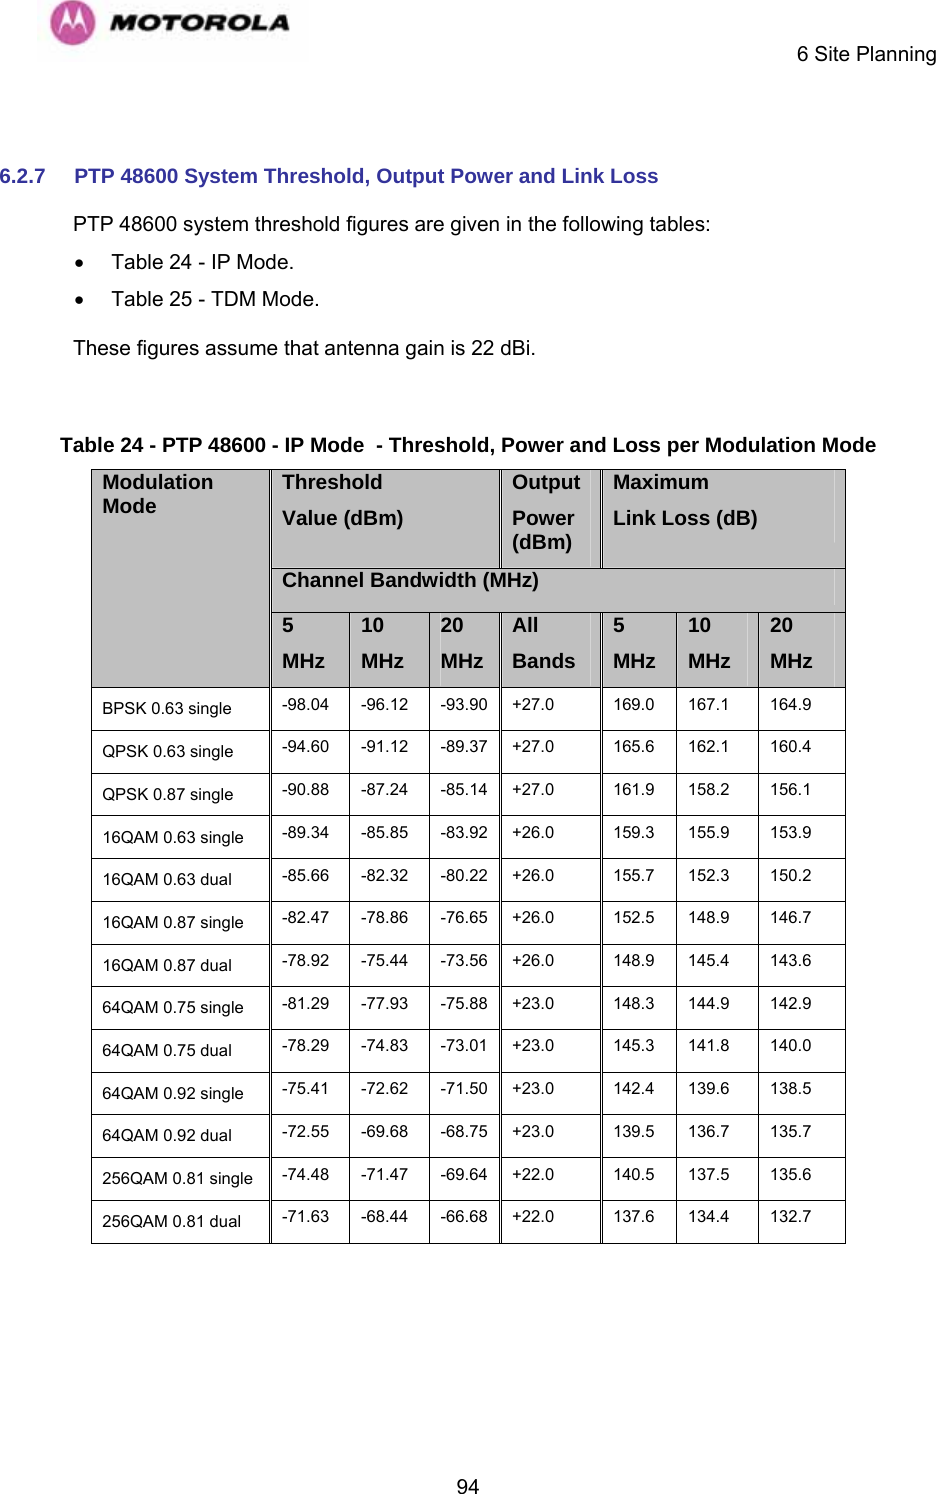     6 Site Planning  94 6.2.7  PTP 48600 System Threshold, Output Power and Link Loss PTP 48600 system threshold figures are given in the following tables: • Table 24 - IP Mode. • Table 25 - TDM Mode. These figures assume that antenna gain is 22 dBi.  Table 24 - PTP 48600 - IP Mode  - Threshold, Power and Loss per Modulation Mode Threshold Value (dBm) Output Power (dBm) Maximum Link Loss (dB) Channel Bandwidth (MHz) Modulation Mode 5 MHz 10 MHz 20 MHz All  Bands 5 MHz 10 MHz 20 MHz BPSK 0.63 single  -98.04 -96.12 -93.90 +27.0  169.0 167.1  164.9 QPSK 0.63 single  -94.60 -91.12 -89.37 +27.0  165.6 162.1  160.4 QPSK 0.87 single  -90.88 -87.24 -85.14 +27.0  161.9 158.2  156.1 16QAM 0.63 single  -89.34 -85.85 -83.92 +26.0  159.3 155.9  153.9 16QAM 0.63 dual  -85.66 -82.32 -80.22 +26.0  155.7 152.3  150.2 16QAM 0.87 single  -82.47 -78.86 -76.65 +26.0  152.5 148.9  146.7 16QAM 0.87 dual  -78.92 -75.44 -73.56 +26.0  148.9 145.4  143.6 64QAM 0.75 single  -81.29 -77.93 -75.88 +23.0  148.3 144.9  142.9 64QAM 0.75 dual  -78.29 -74.83 -73.01 +23.0  145.3 141.8  140.0 64QAM 0.92 single  -75.41 -72.62 -71.50 +23.0  142.4 139.6  138.5 64QAM 0.92 dual  -72.55 -69.68 -68.75 +23.0  139.5 136.7  135.7 256QAM 0.81 single  -74.48 -71.47 -69.64 +22.0  140.5 137.5  135.6 256QAM 0.81 dual  -71.63 -68.44 -66.68 +22.0  137.6 134.4  132.7  